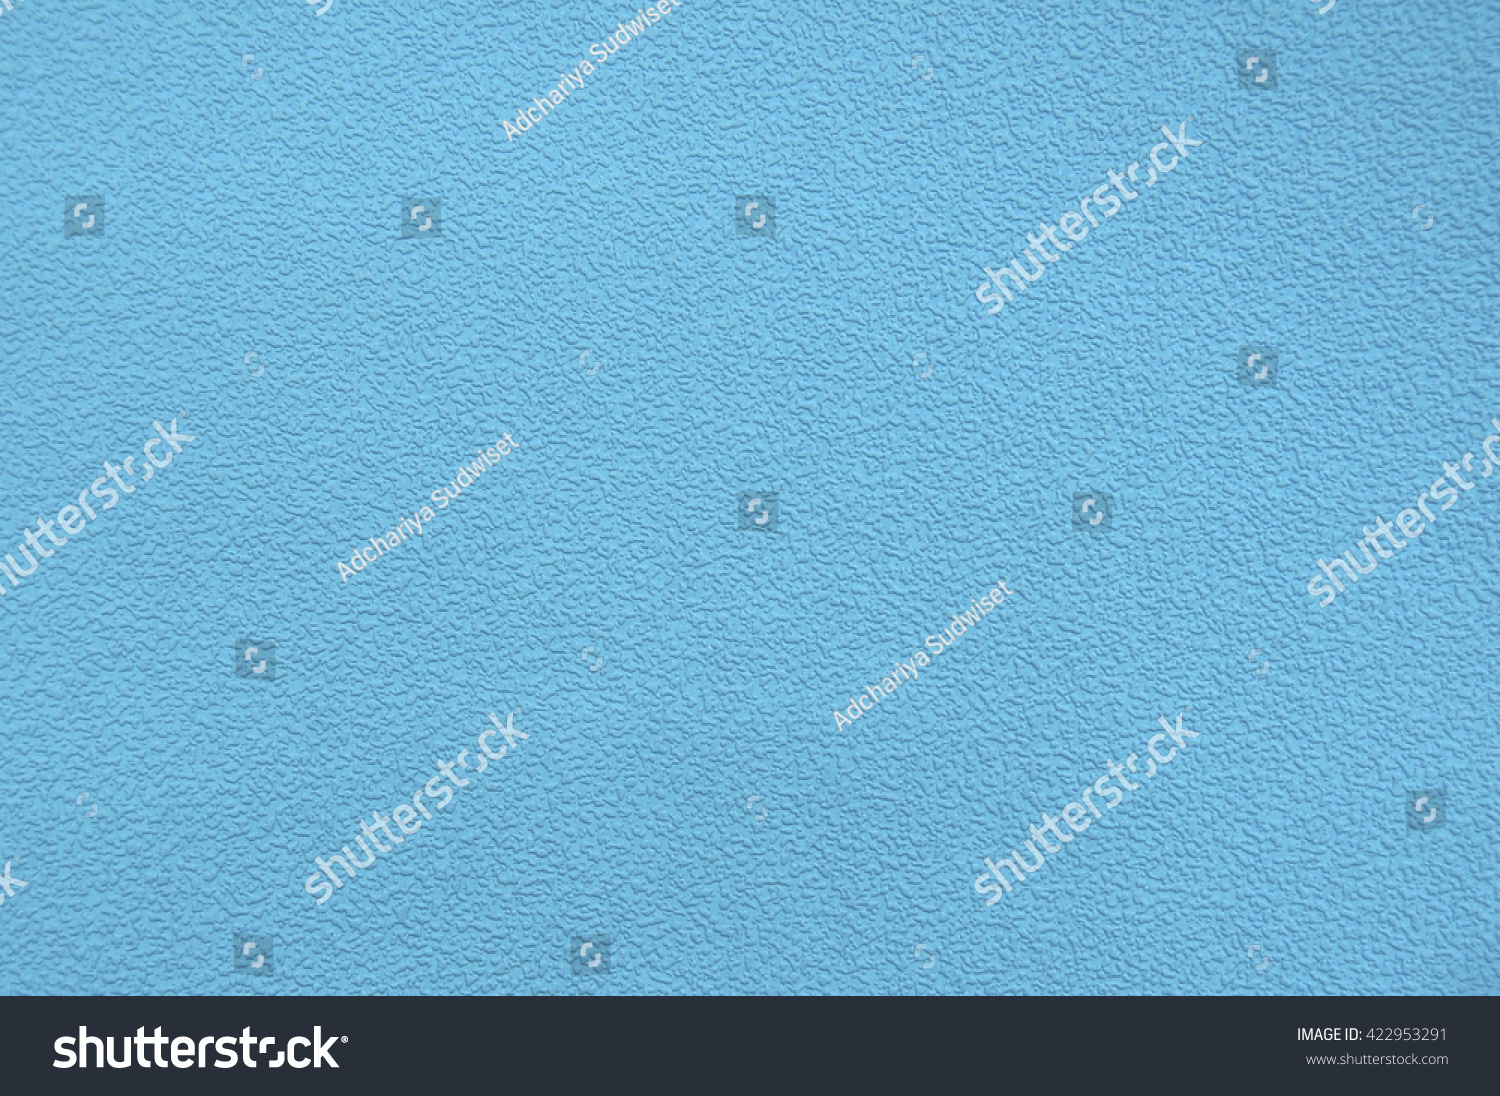 Pale blue texture background Stock Photos, Images & Photography |  Shutterstock